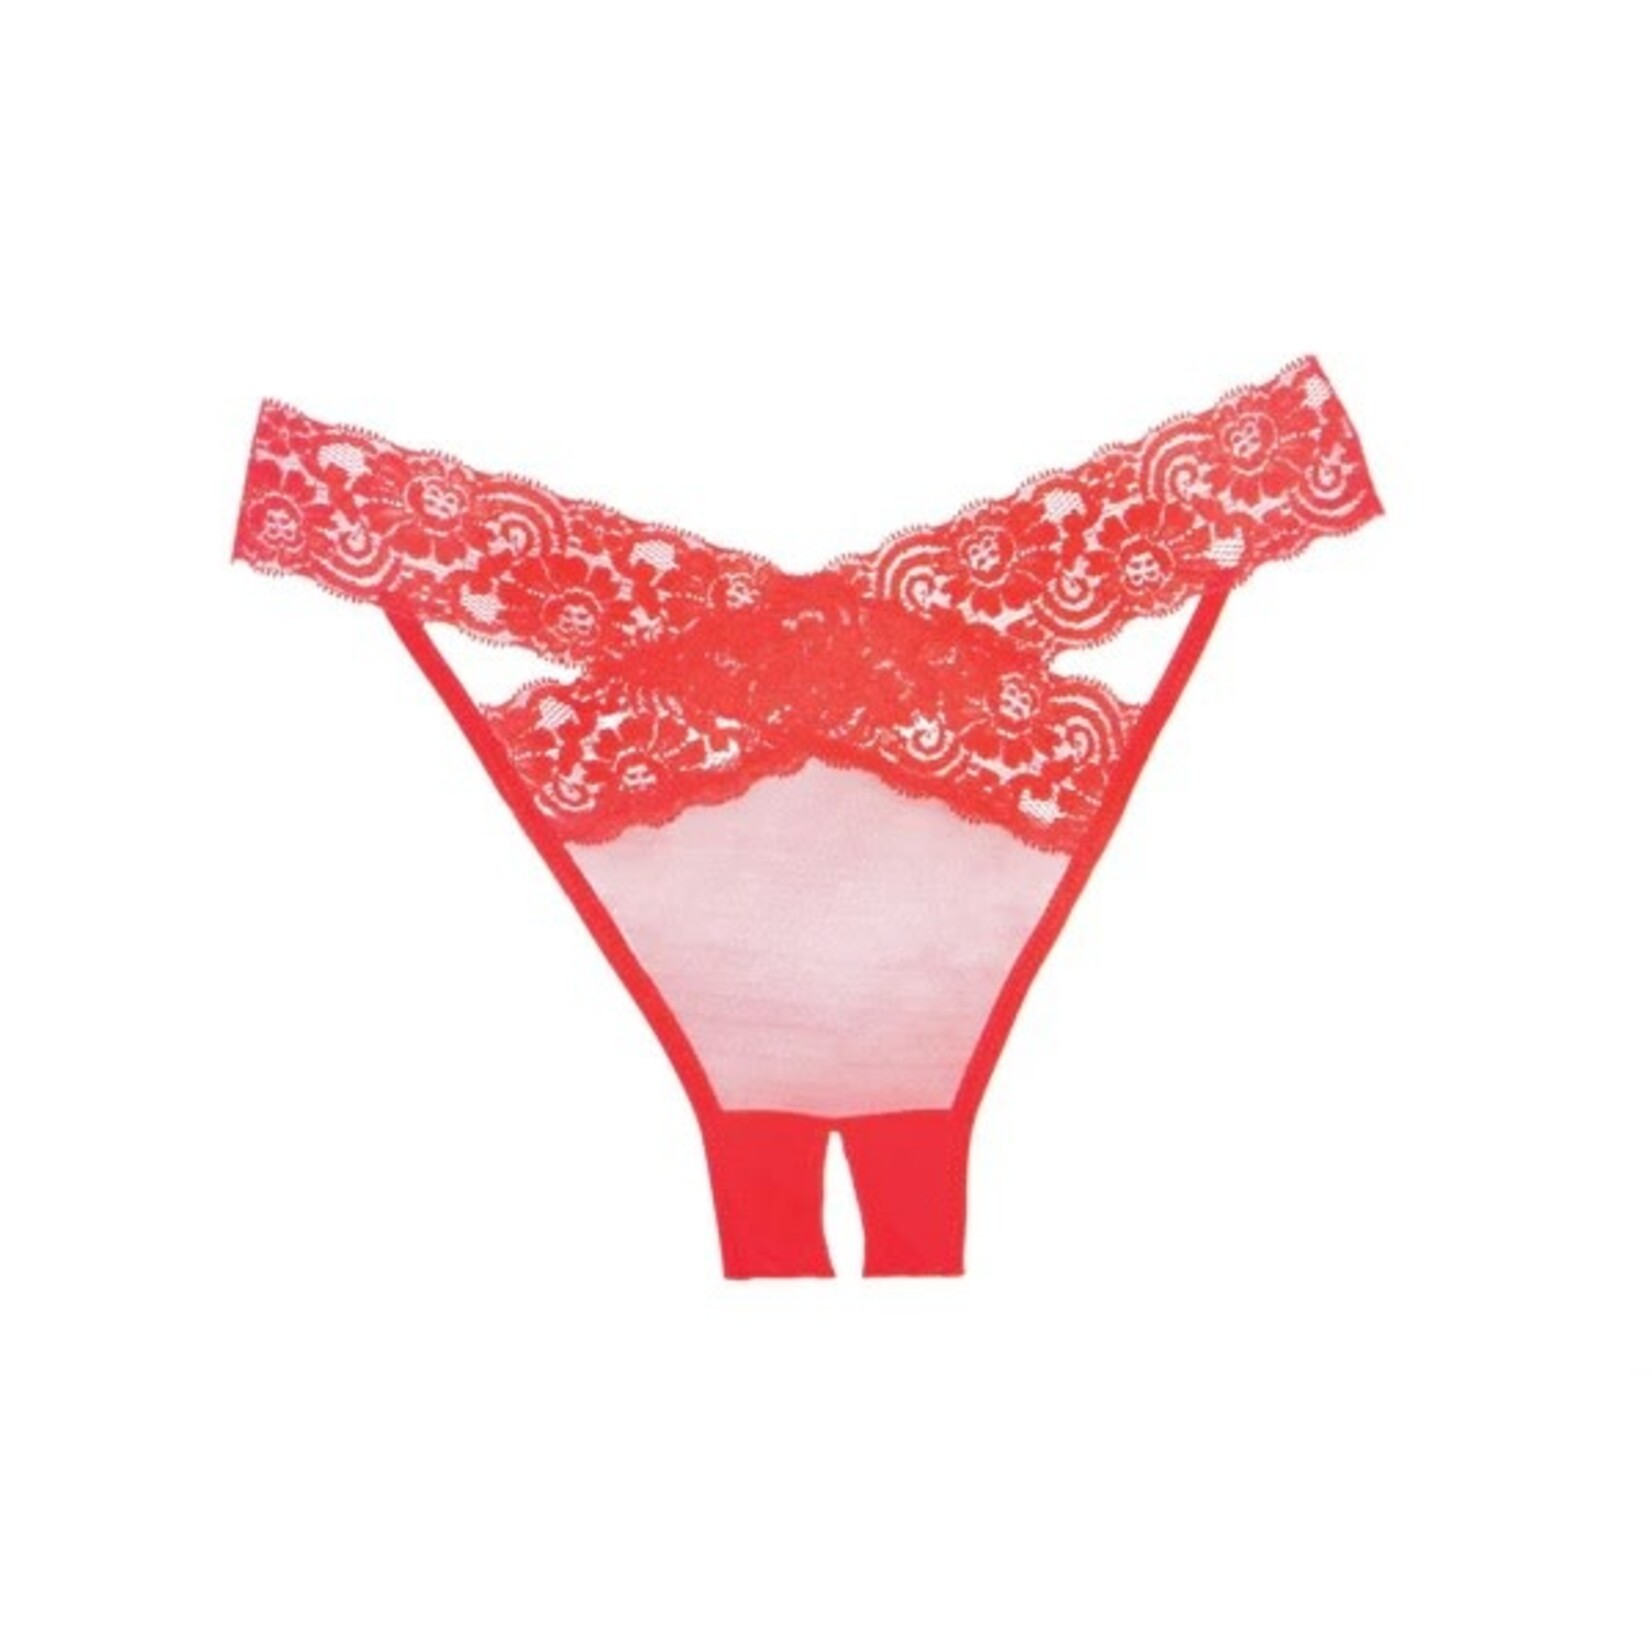 ALLURE LINGERIE ALLURE ADORE - DESIRE PANTY - ONE SIZE-RED